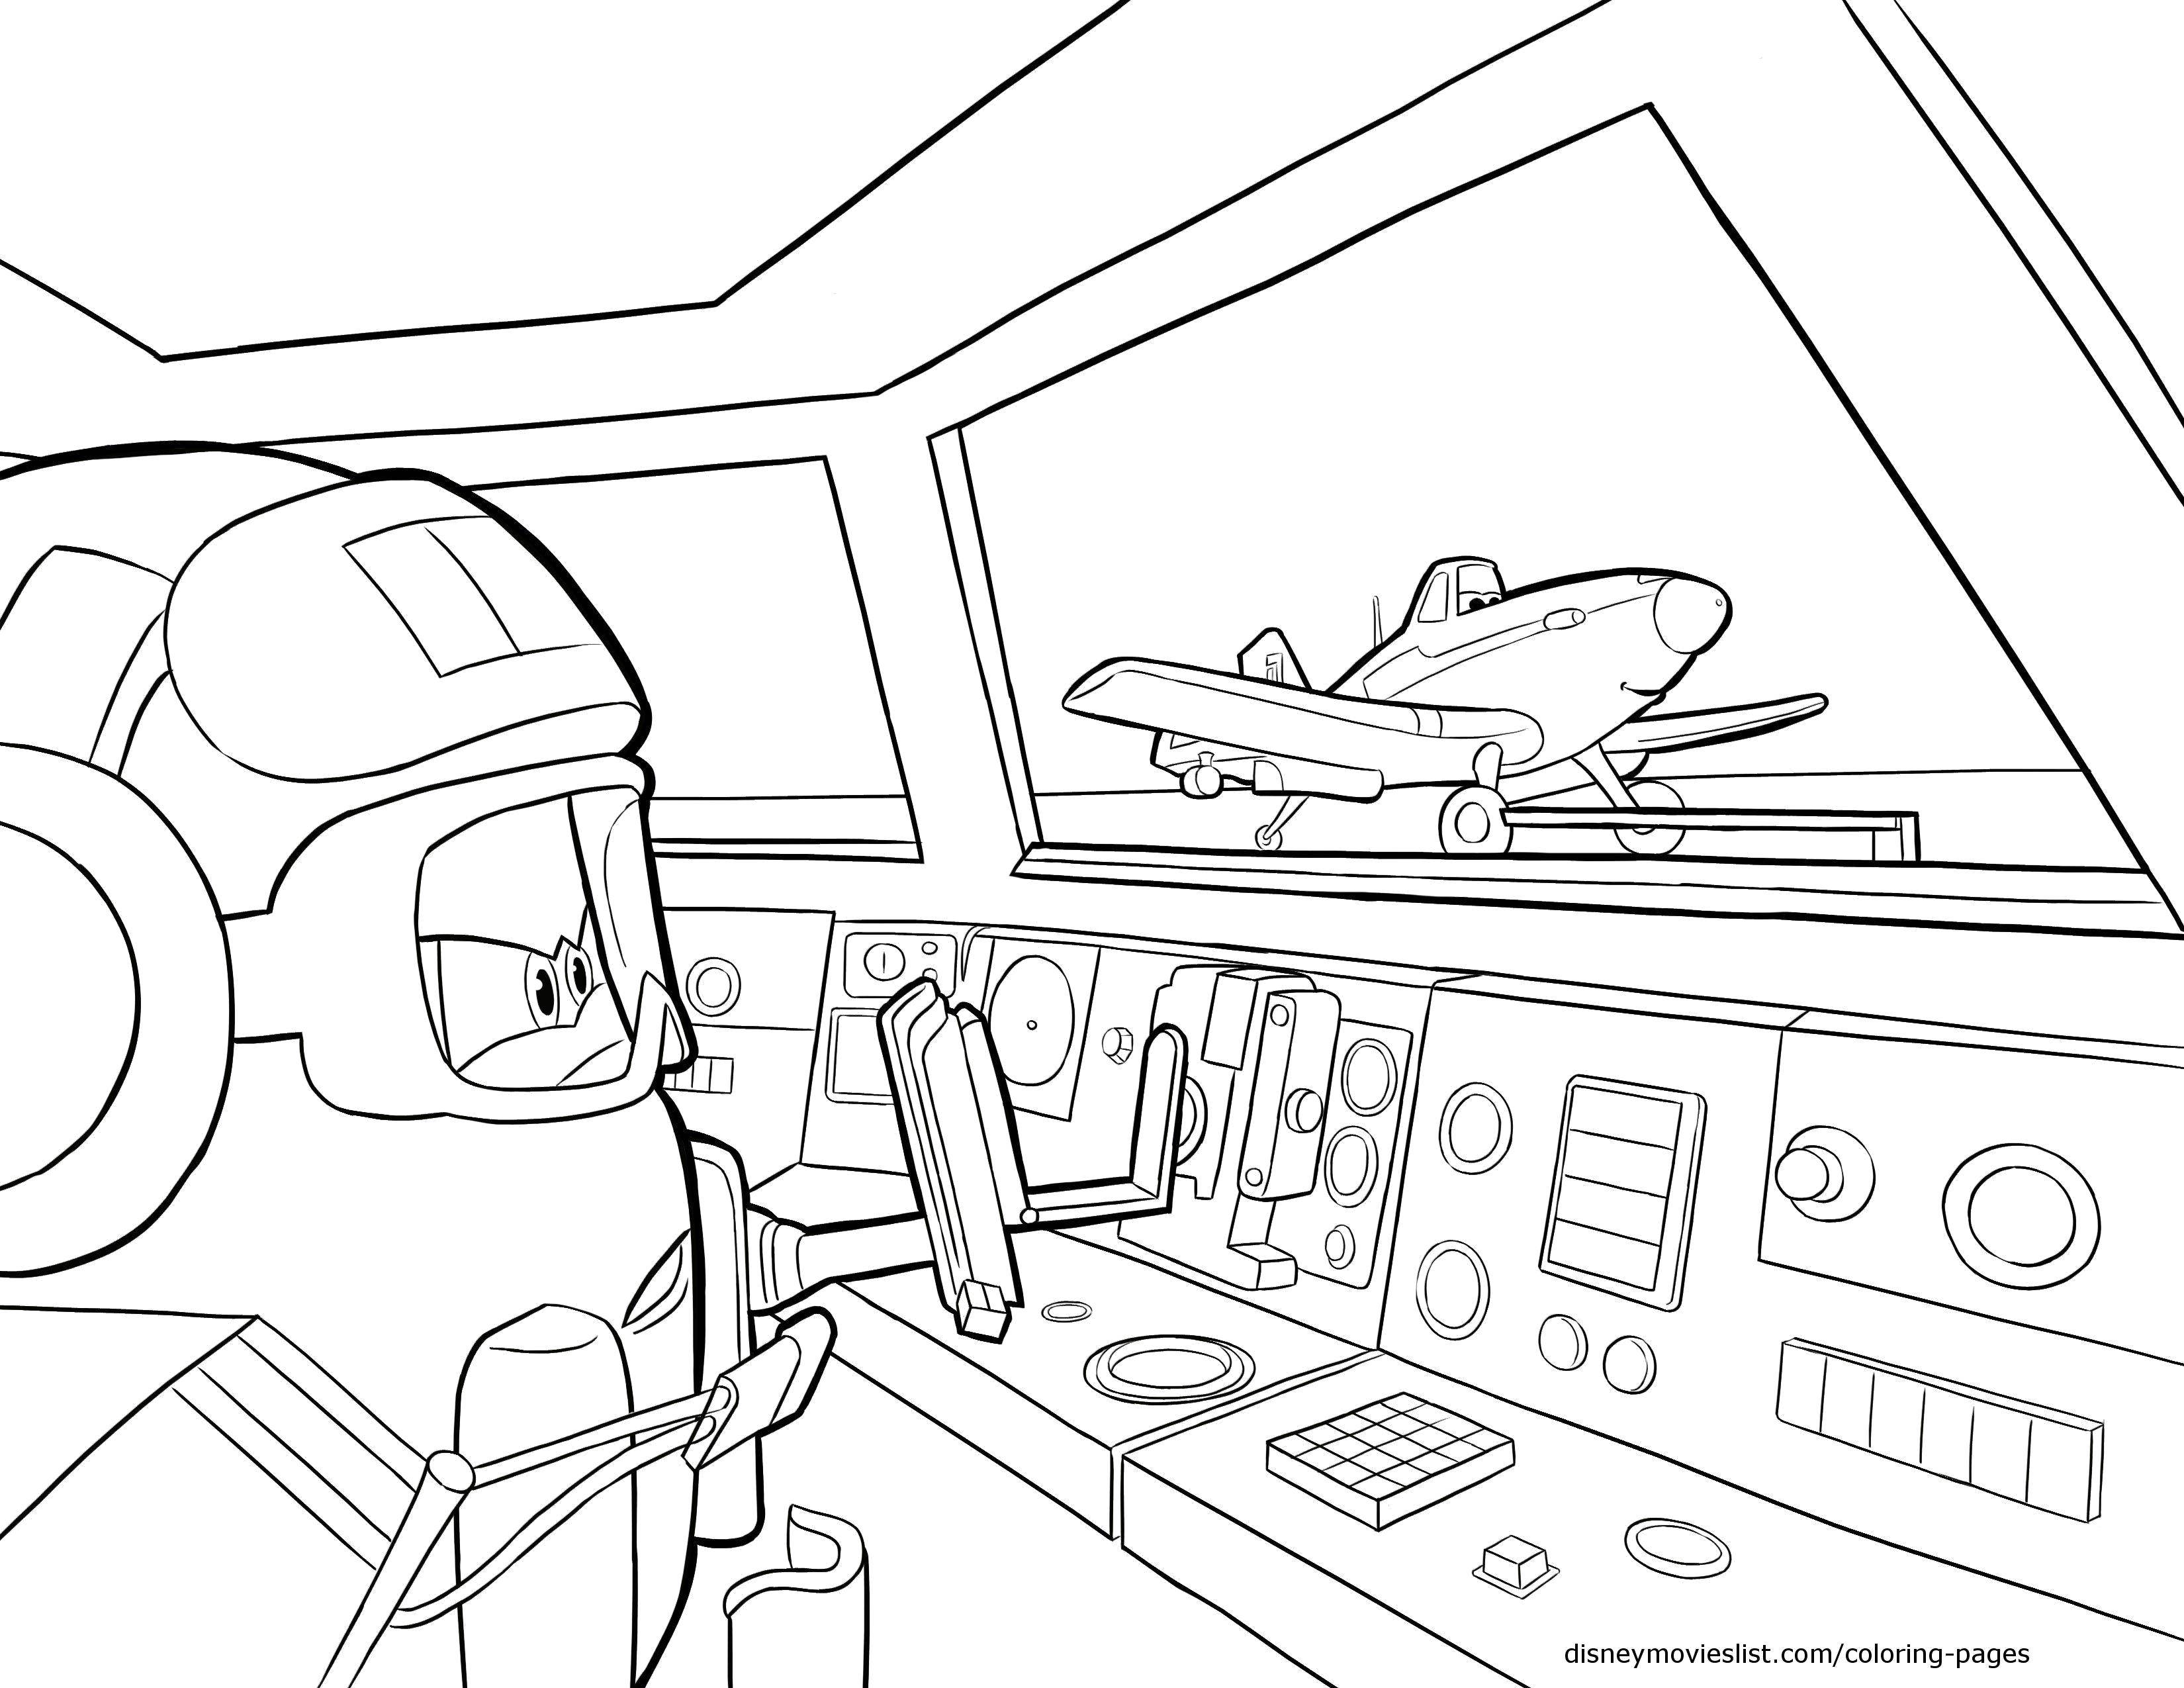 Coloring The pilot at the controls of the aircraft. Category The planes. Tags:  Plane.